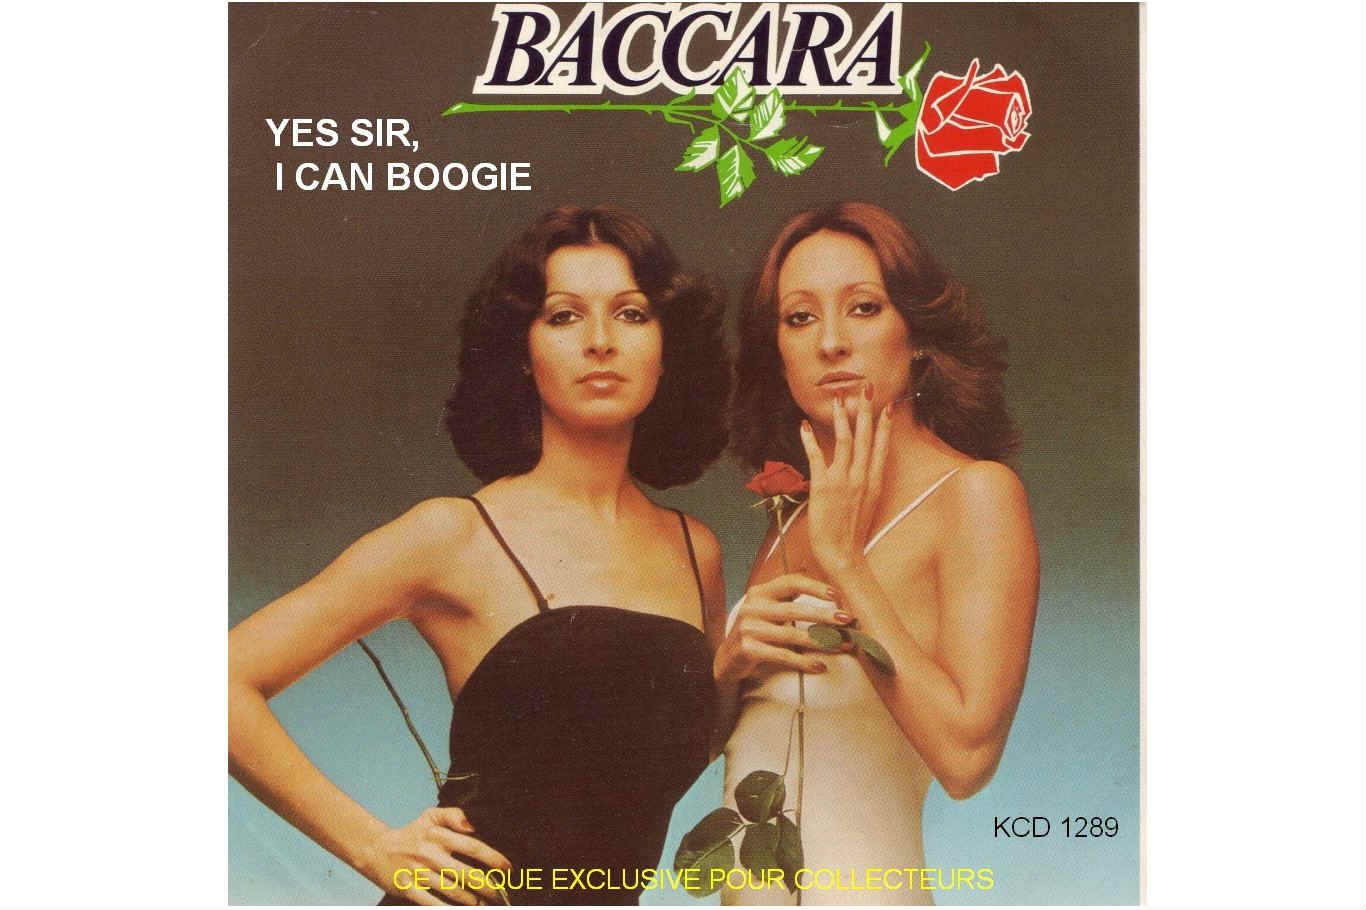 Throwback Thursday Baccara Yes Sir I Can Boogie